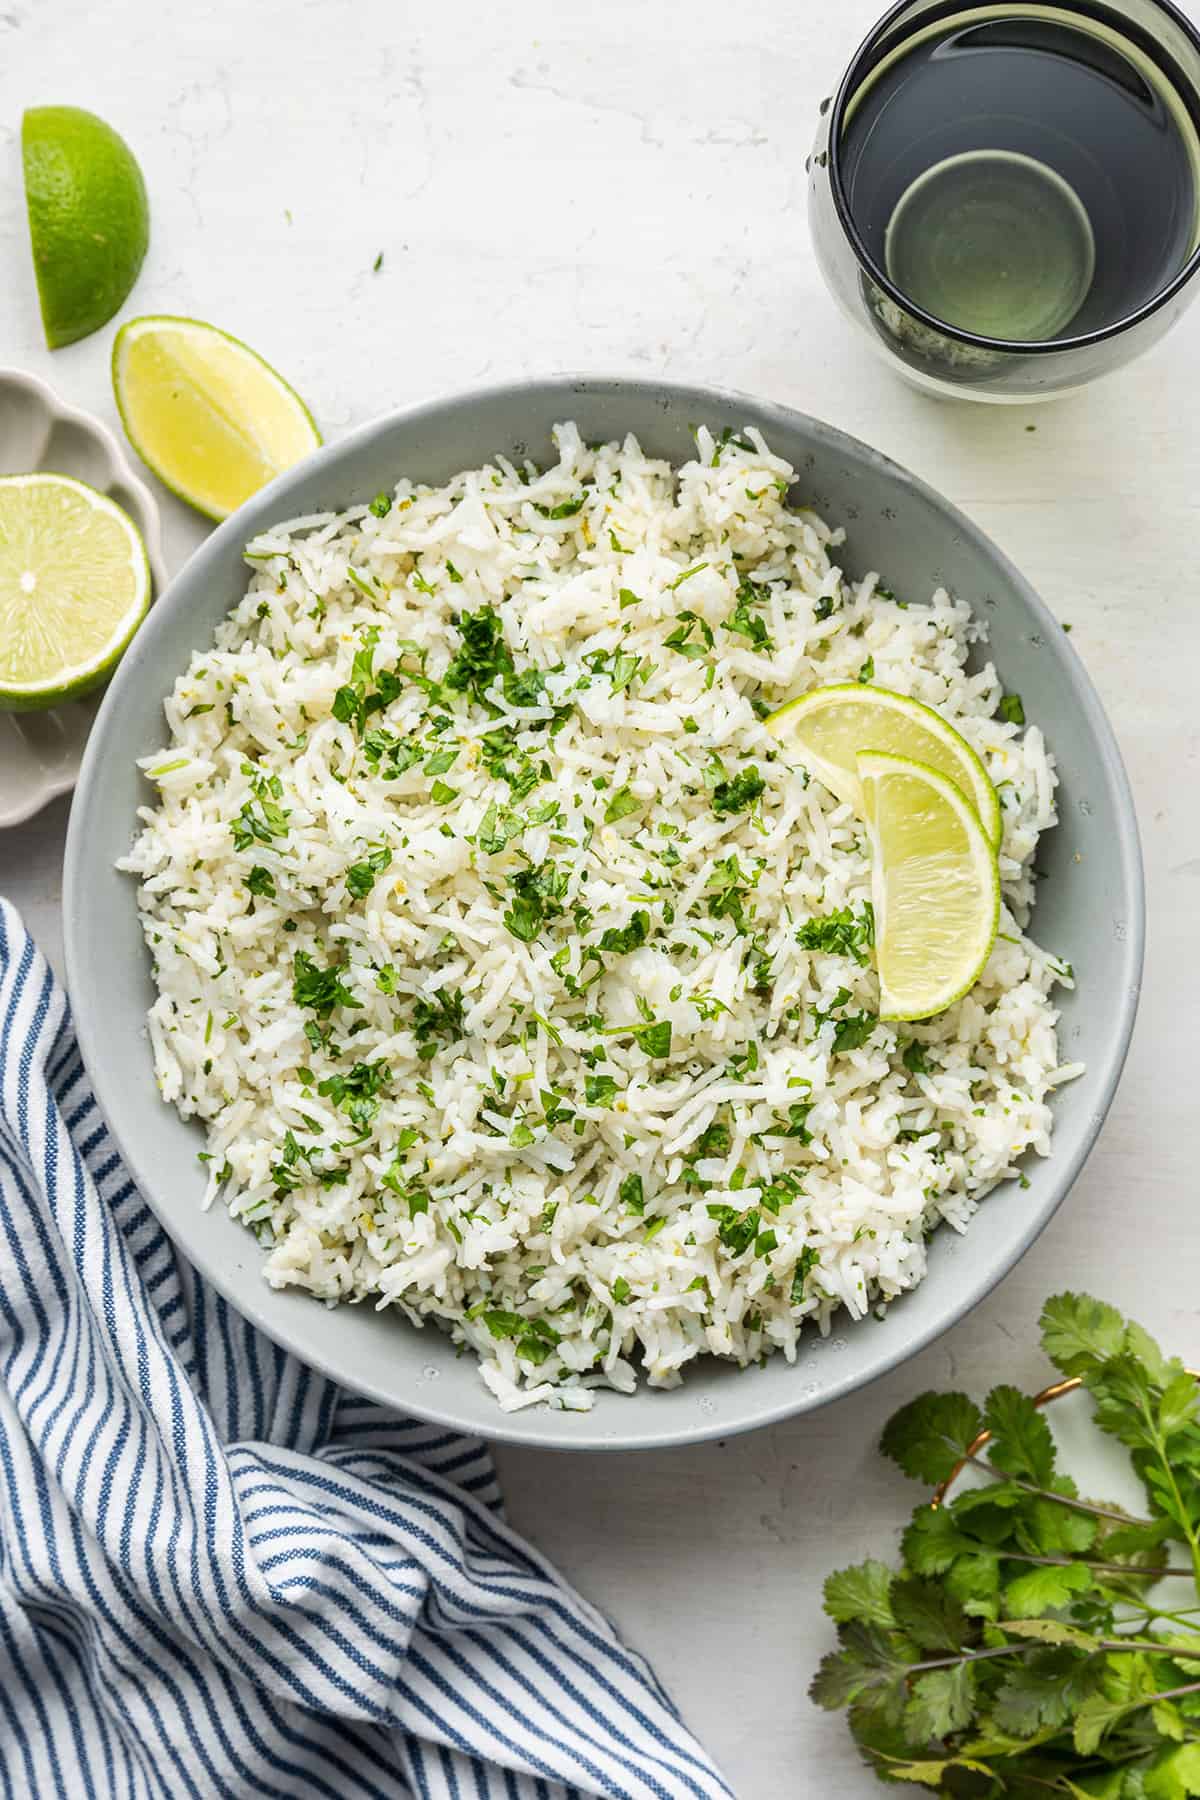 A plate of cilantro lime rice topped with lime slices, next to a sprig of cilantro, fresh limes, a kitchen towel, and a water glass